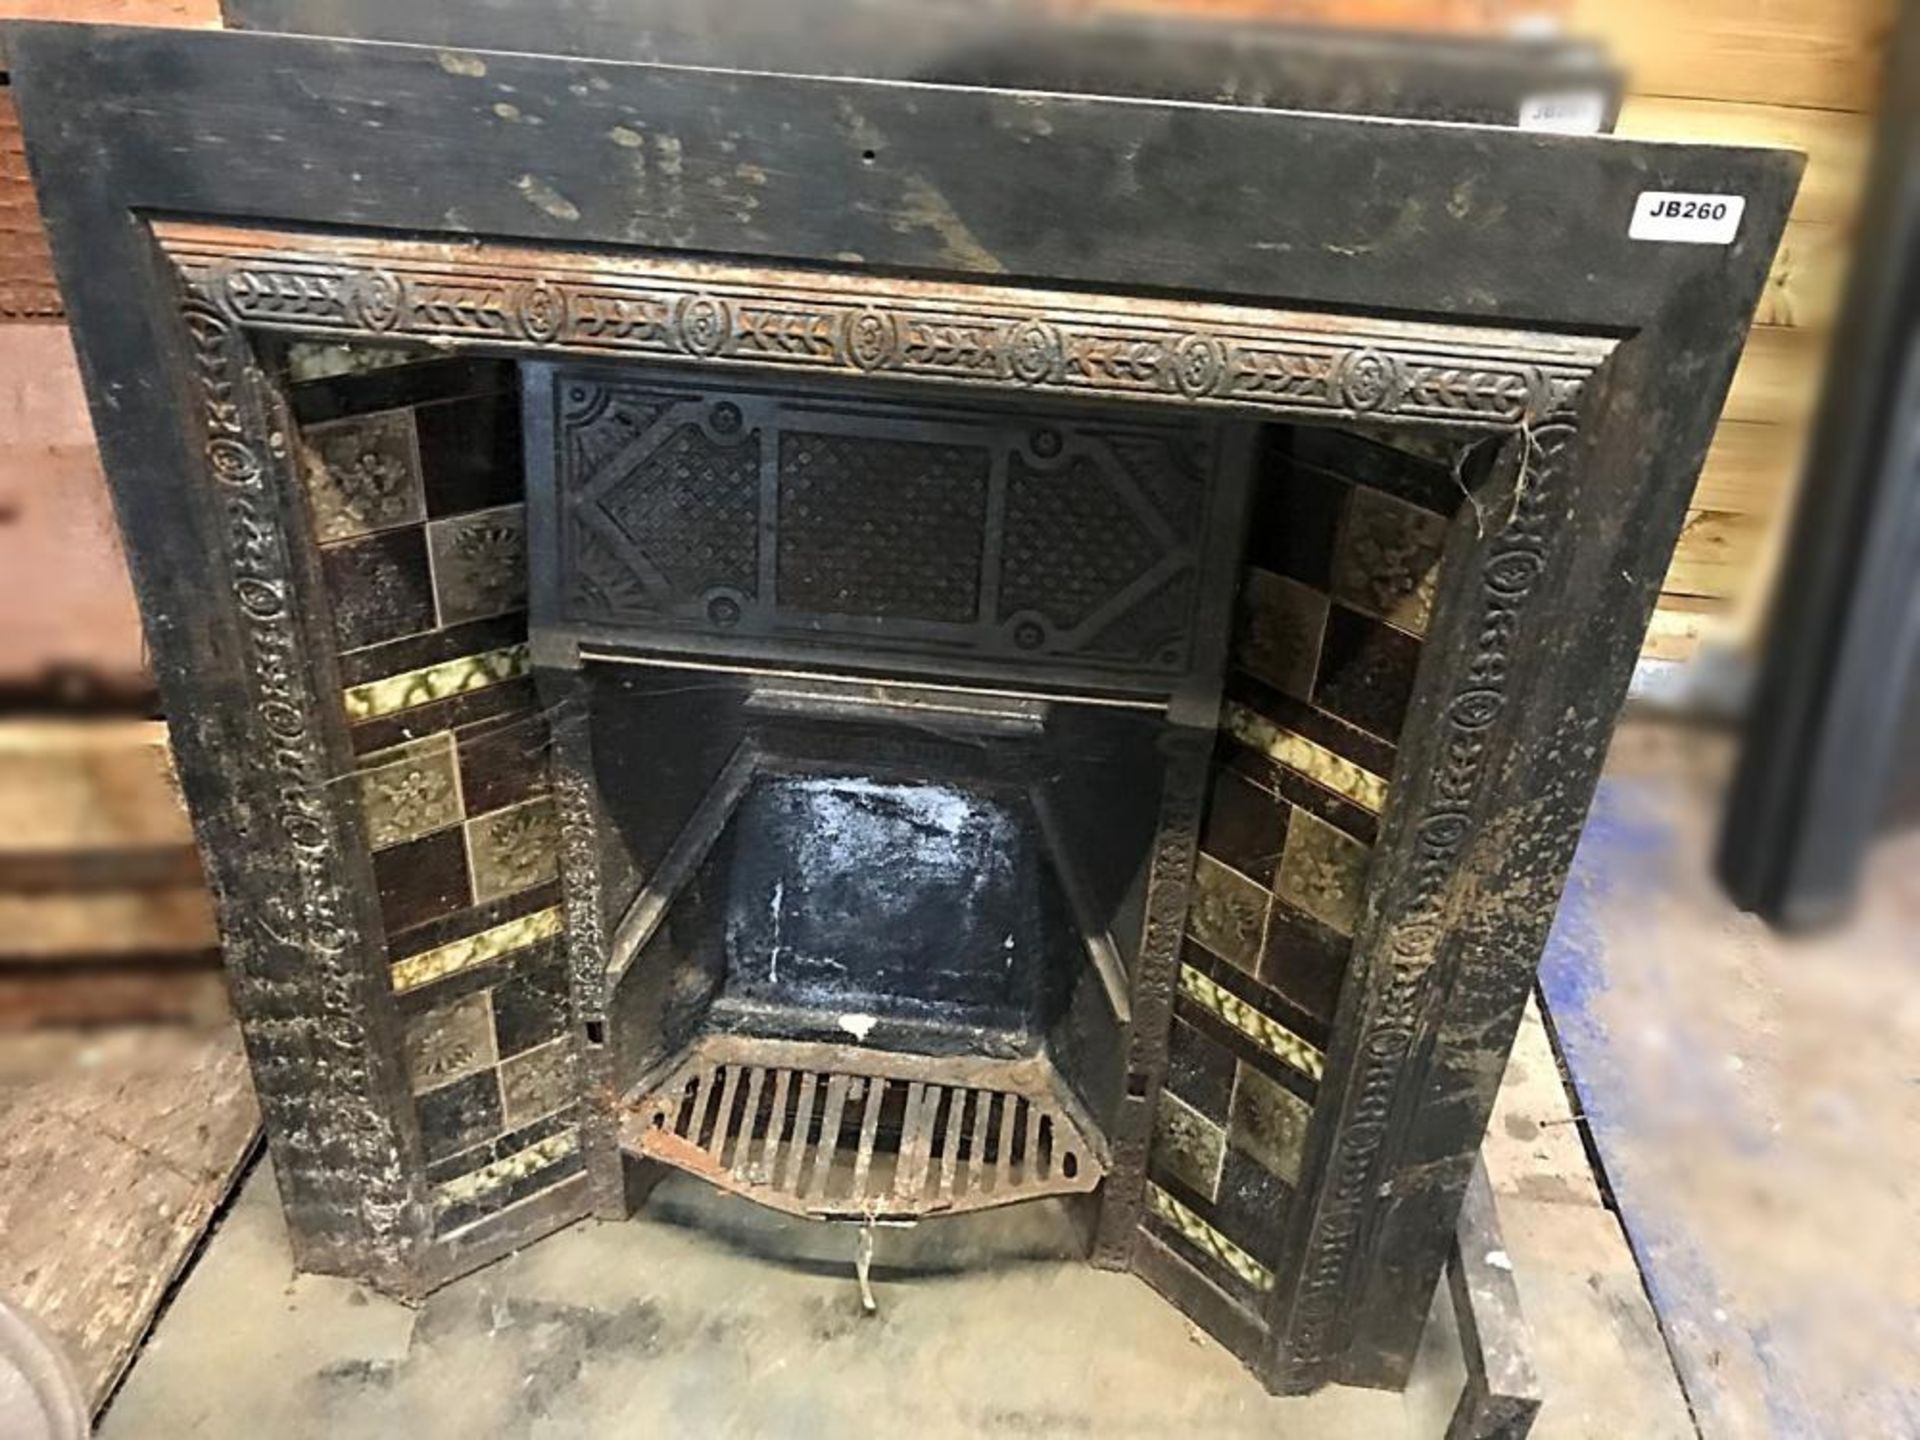 1 x Rare Antique Victorian Cast Iron Fire Insert With Patterned Tiles To Sides - Dimensions: Width 9